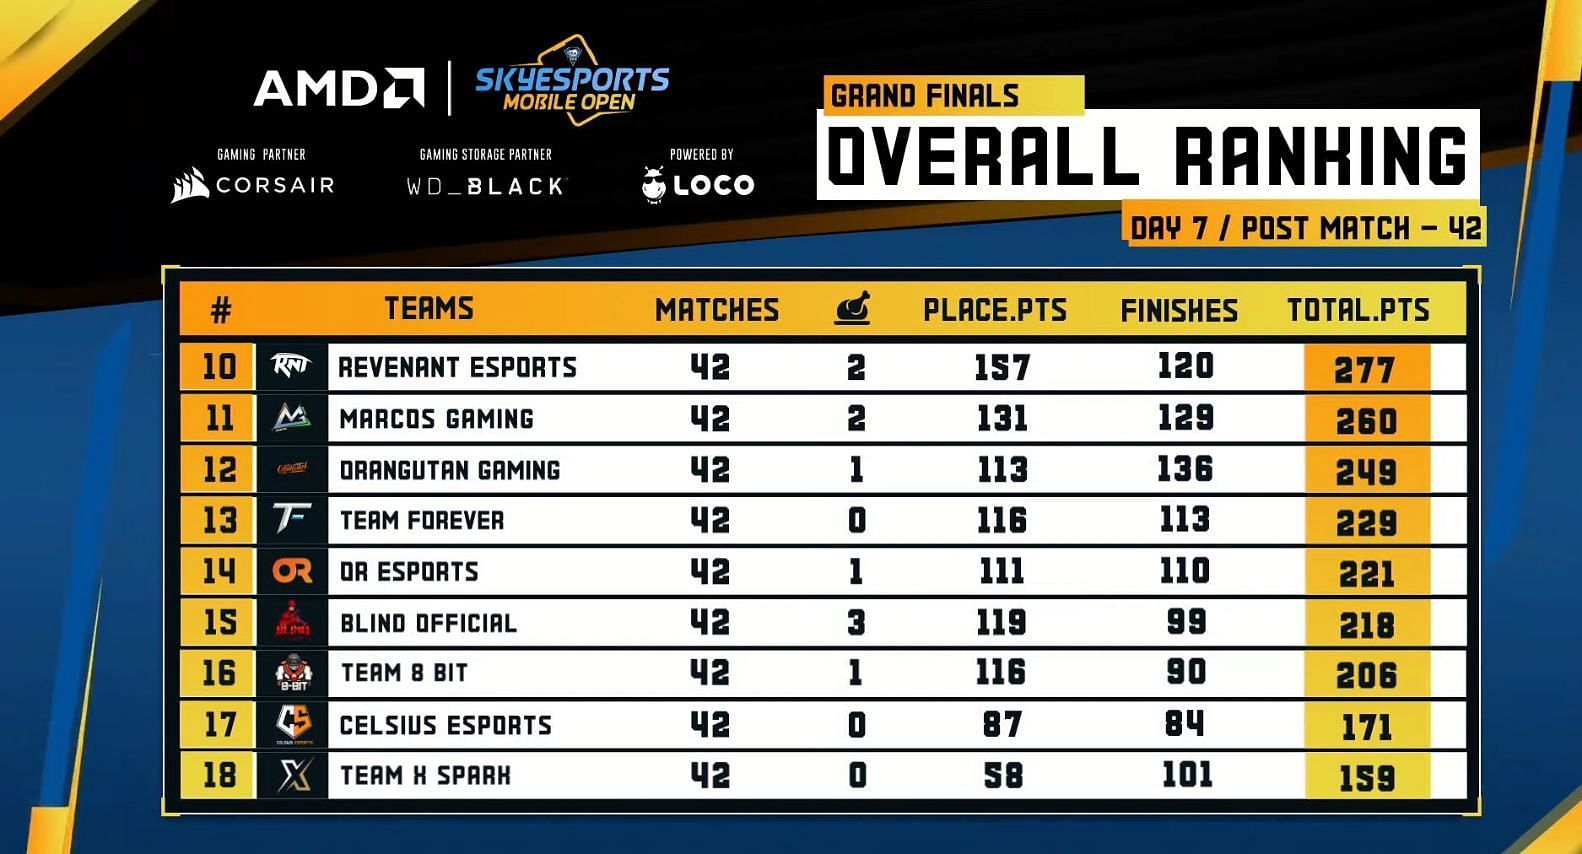 Orangutan finished in 12th place in the tournament (Image via Skyesports)